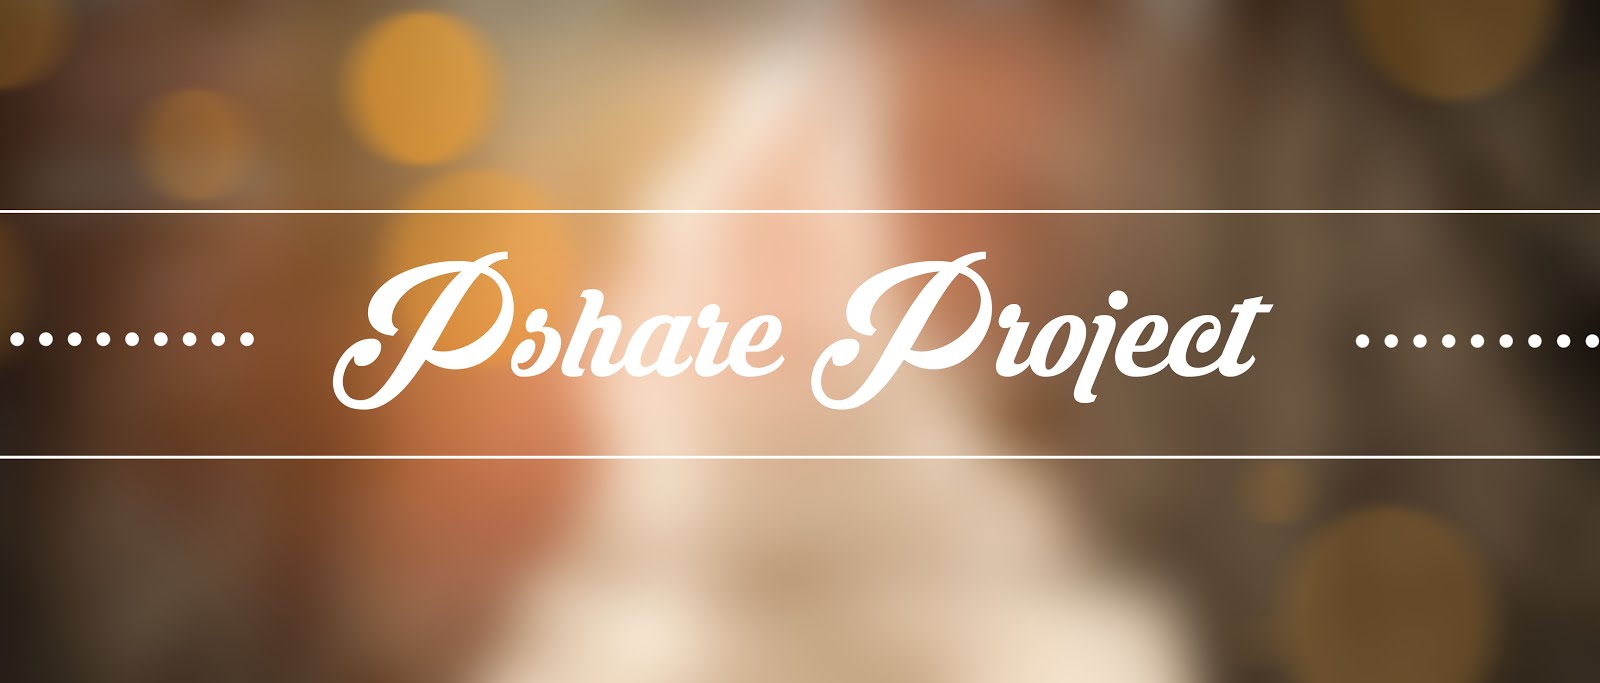 Pshare Project